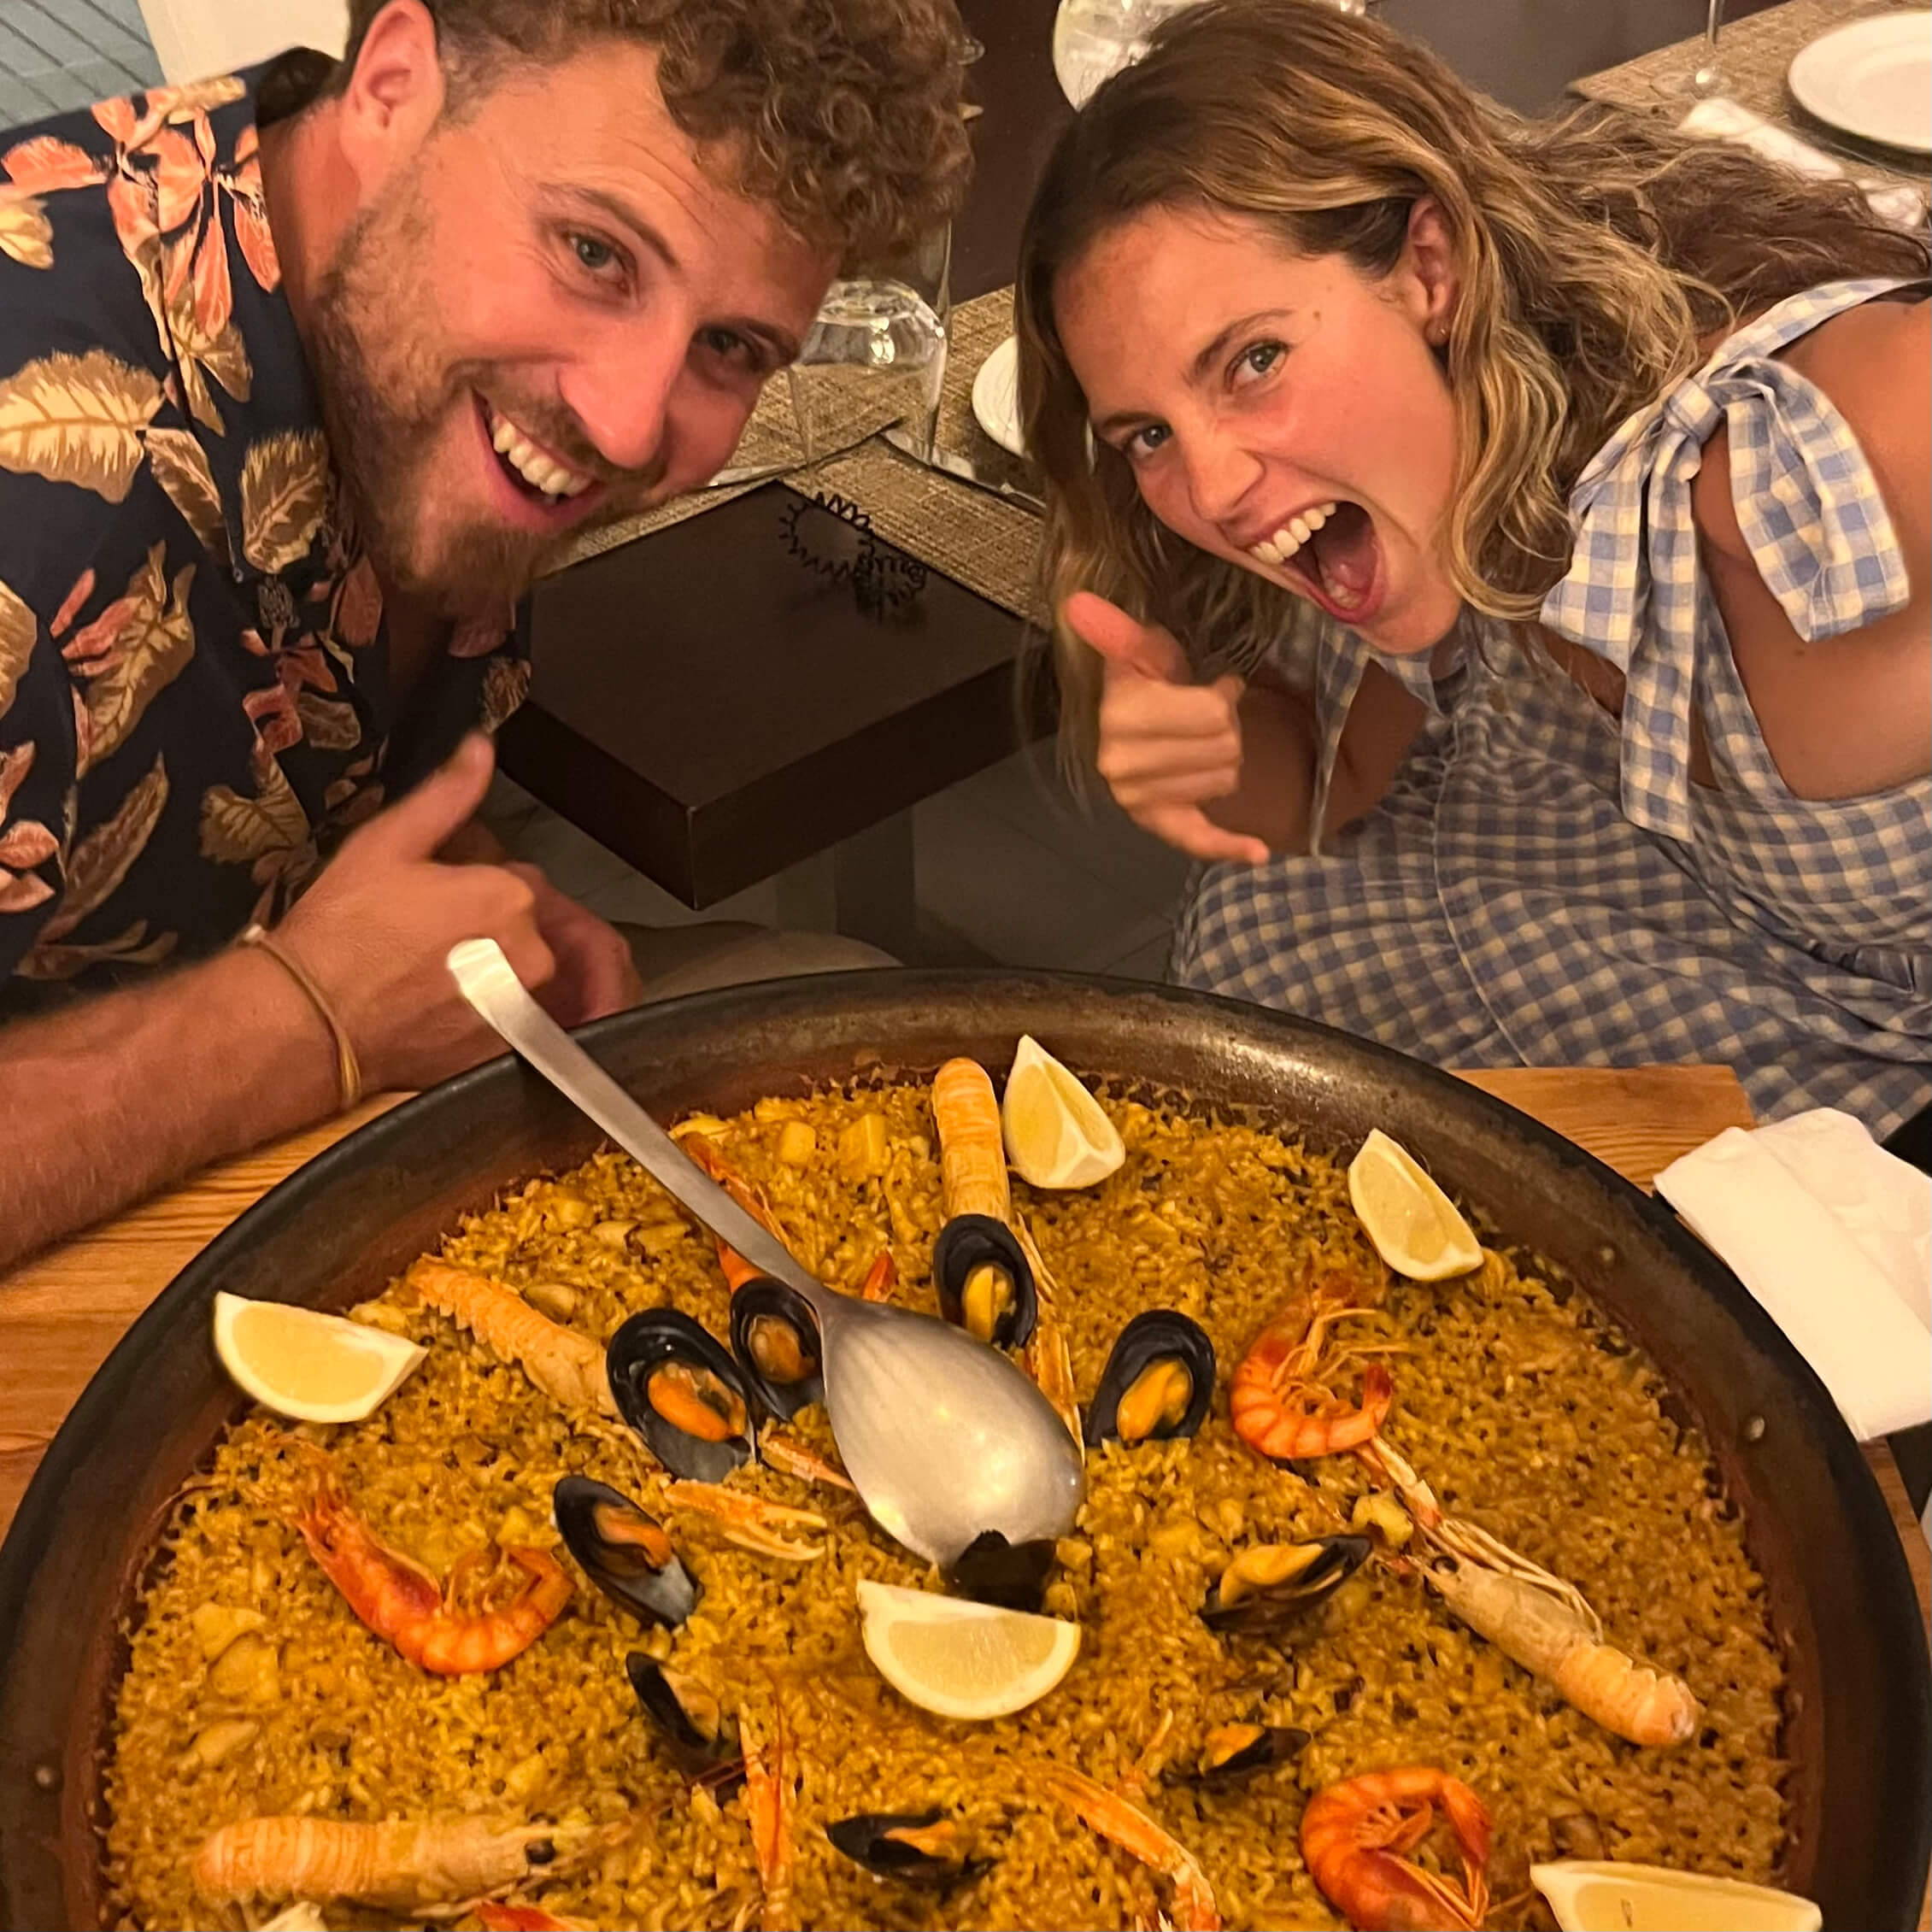 Two very exciting travelled about to try Seafood Paella in Spain